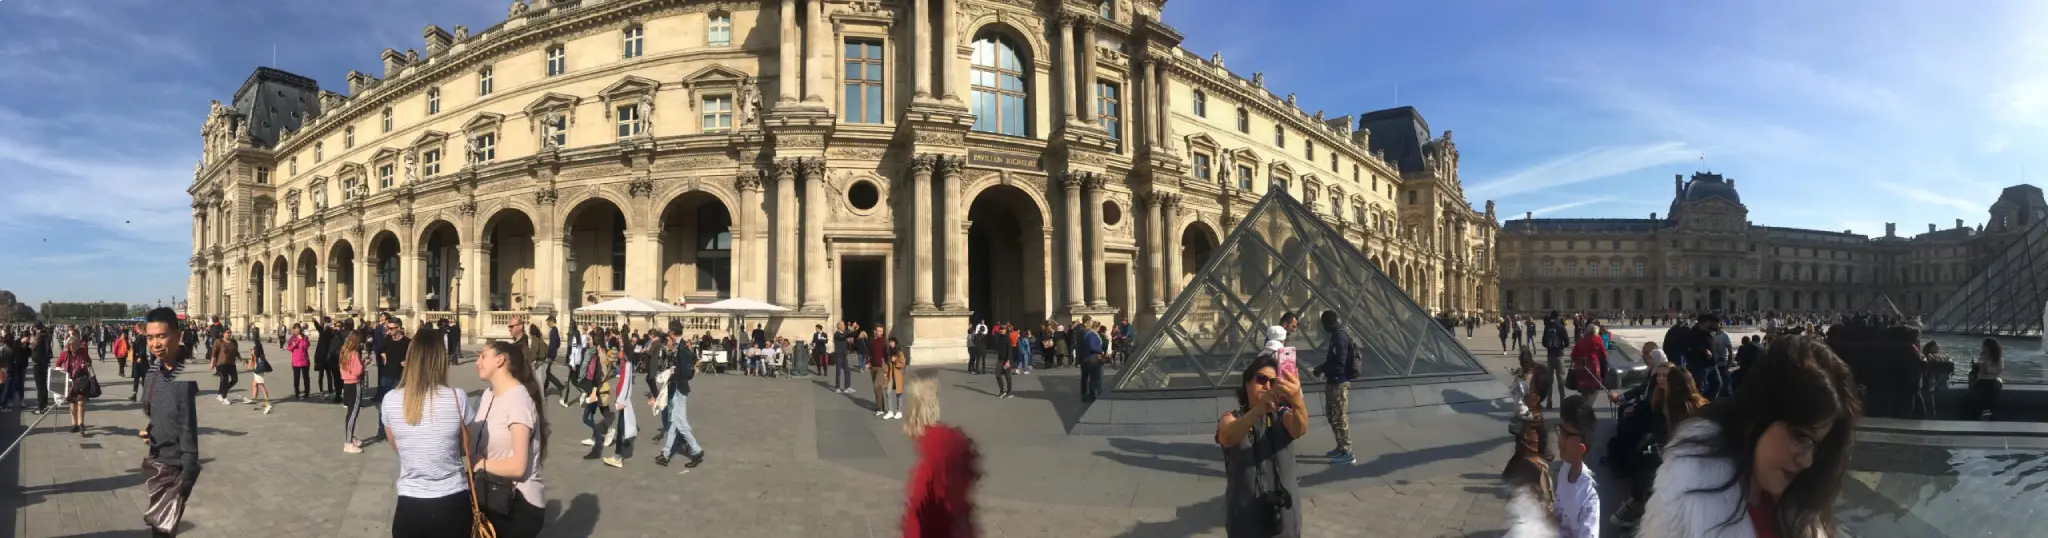 Panoramic of the Louvre in Paris, France.